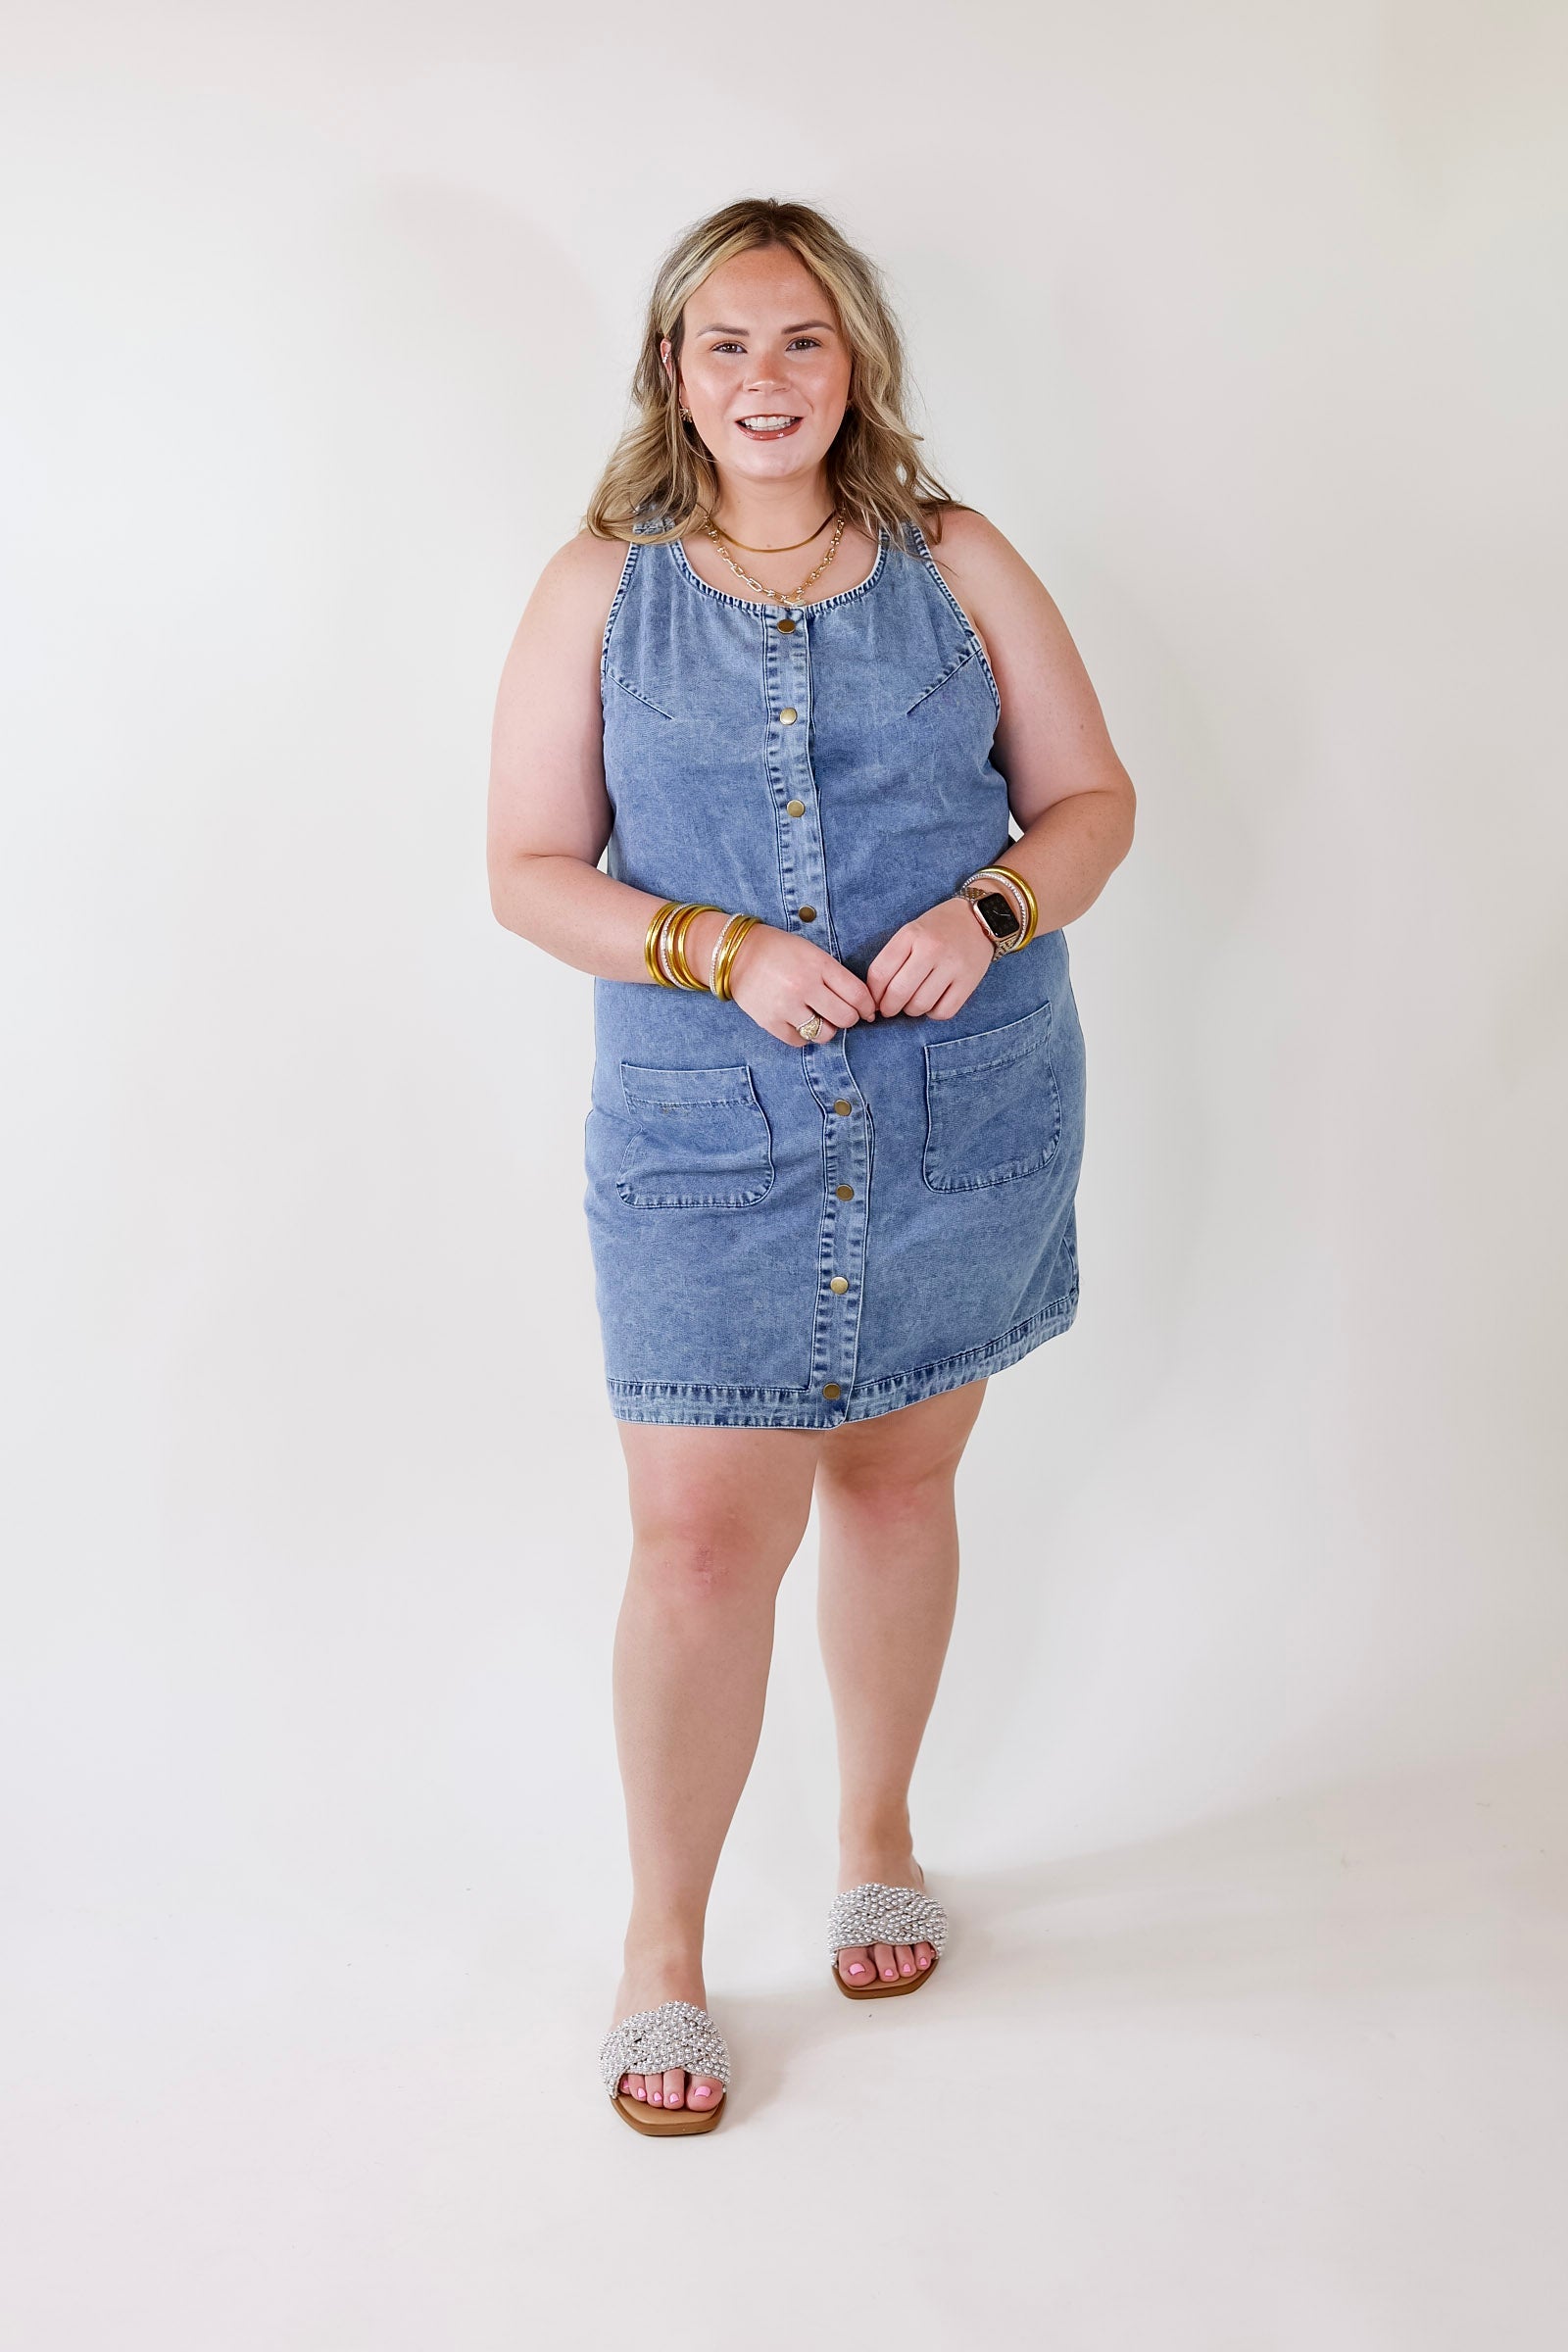 The Girl Next Door Denim Button Up Dress in Light Wash - Giddy Up Glamour Boutique